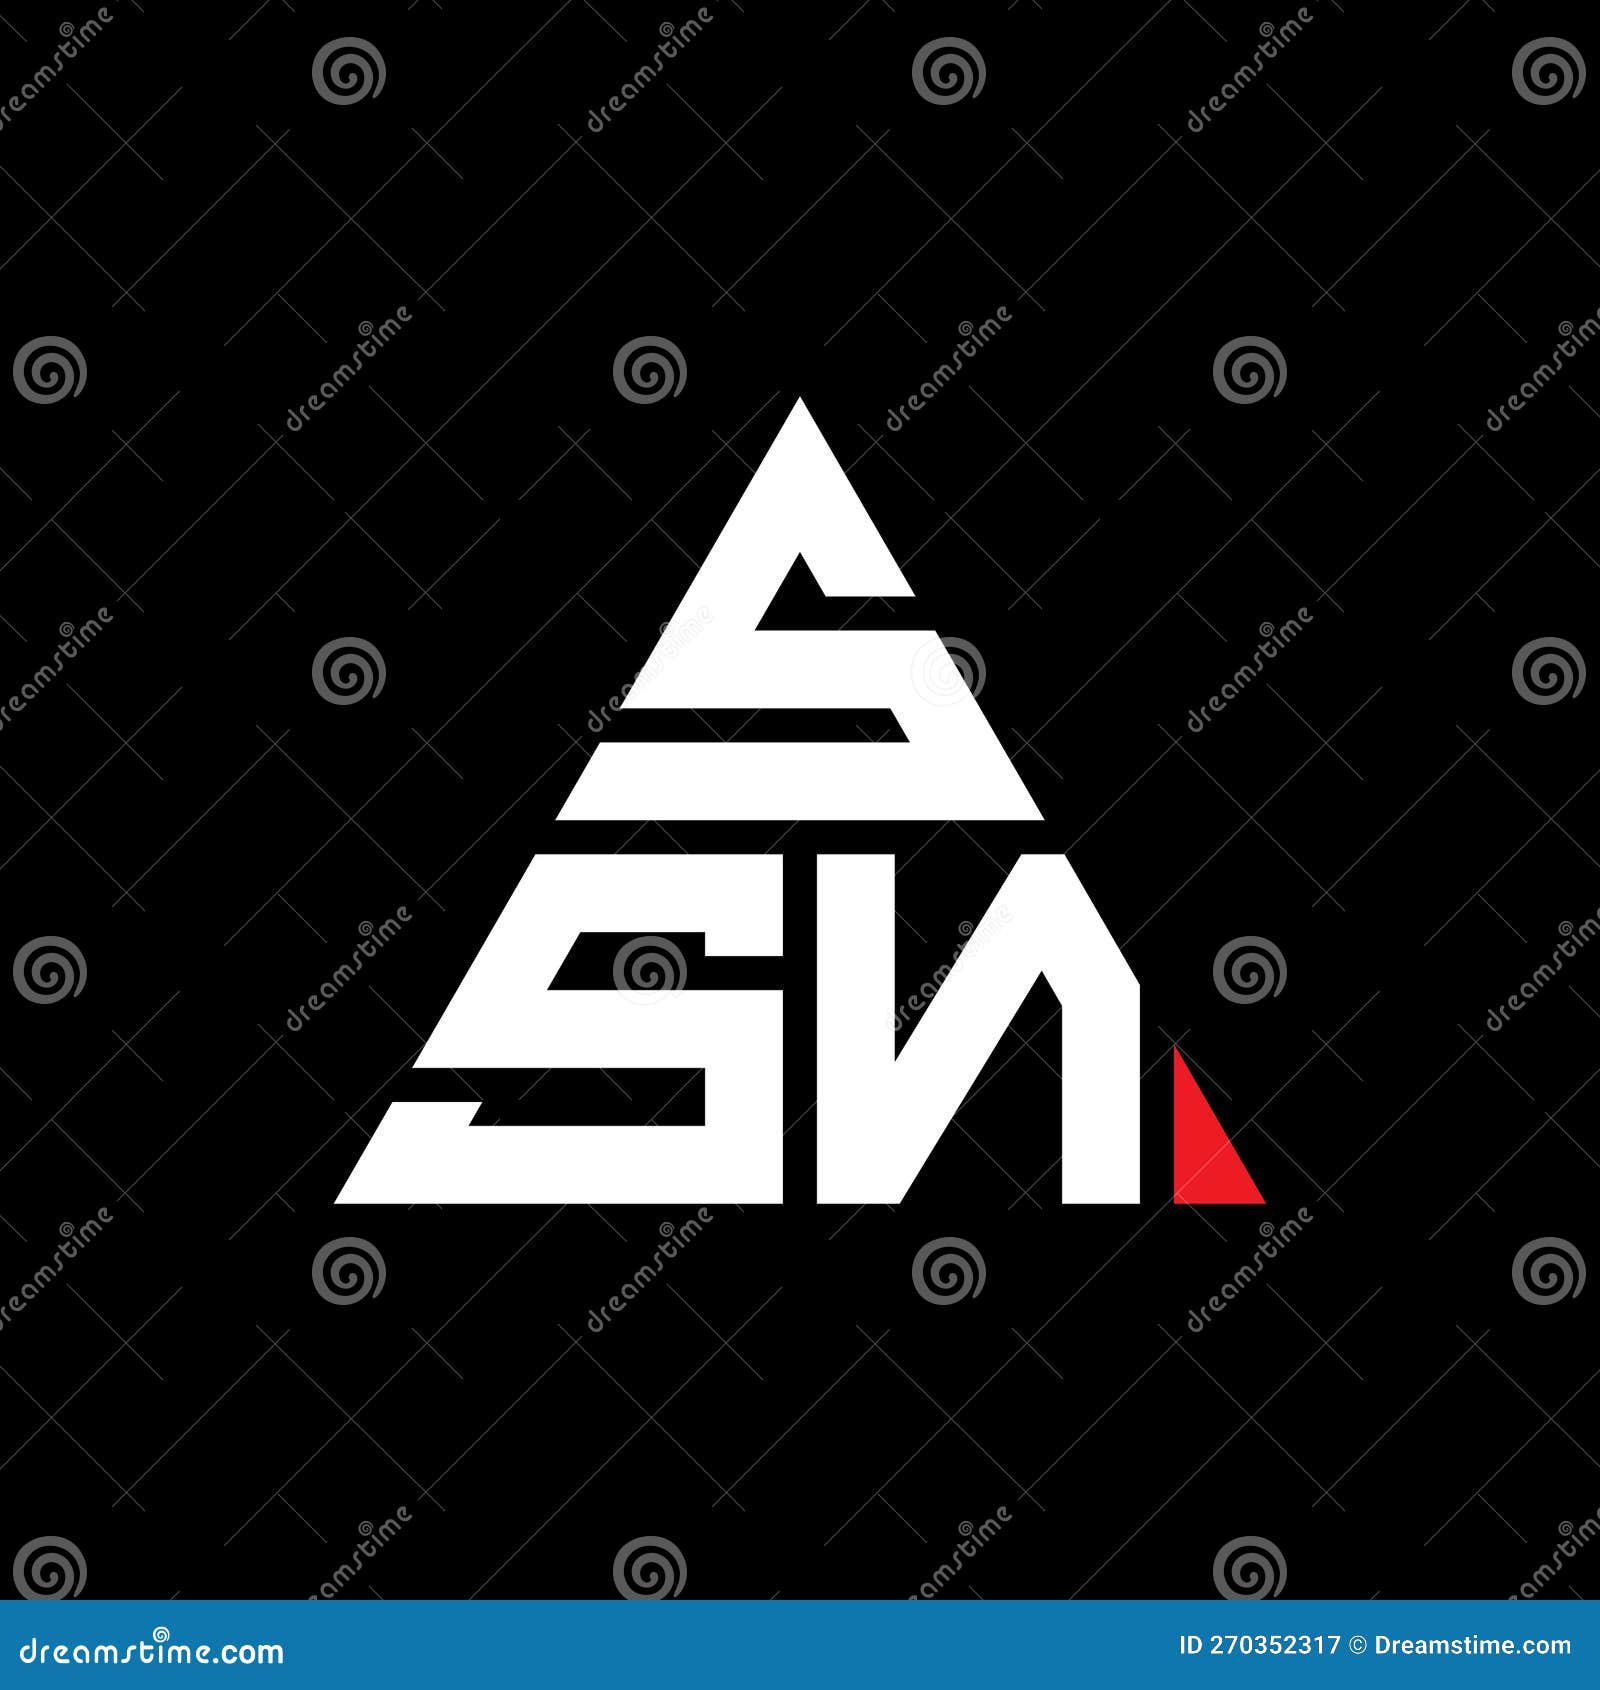 ssn triangle letter logo  with triangle . ssn triangle logo  monogram. ssn triangle  logo template with red